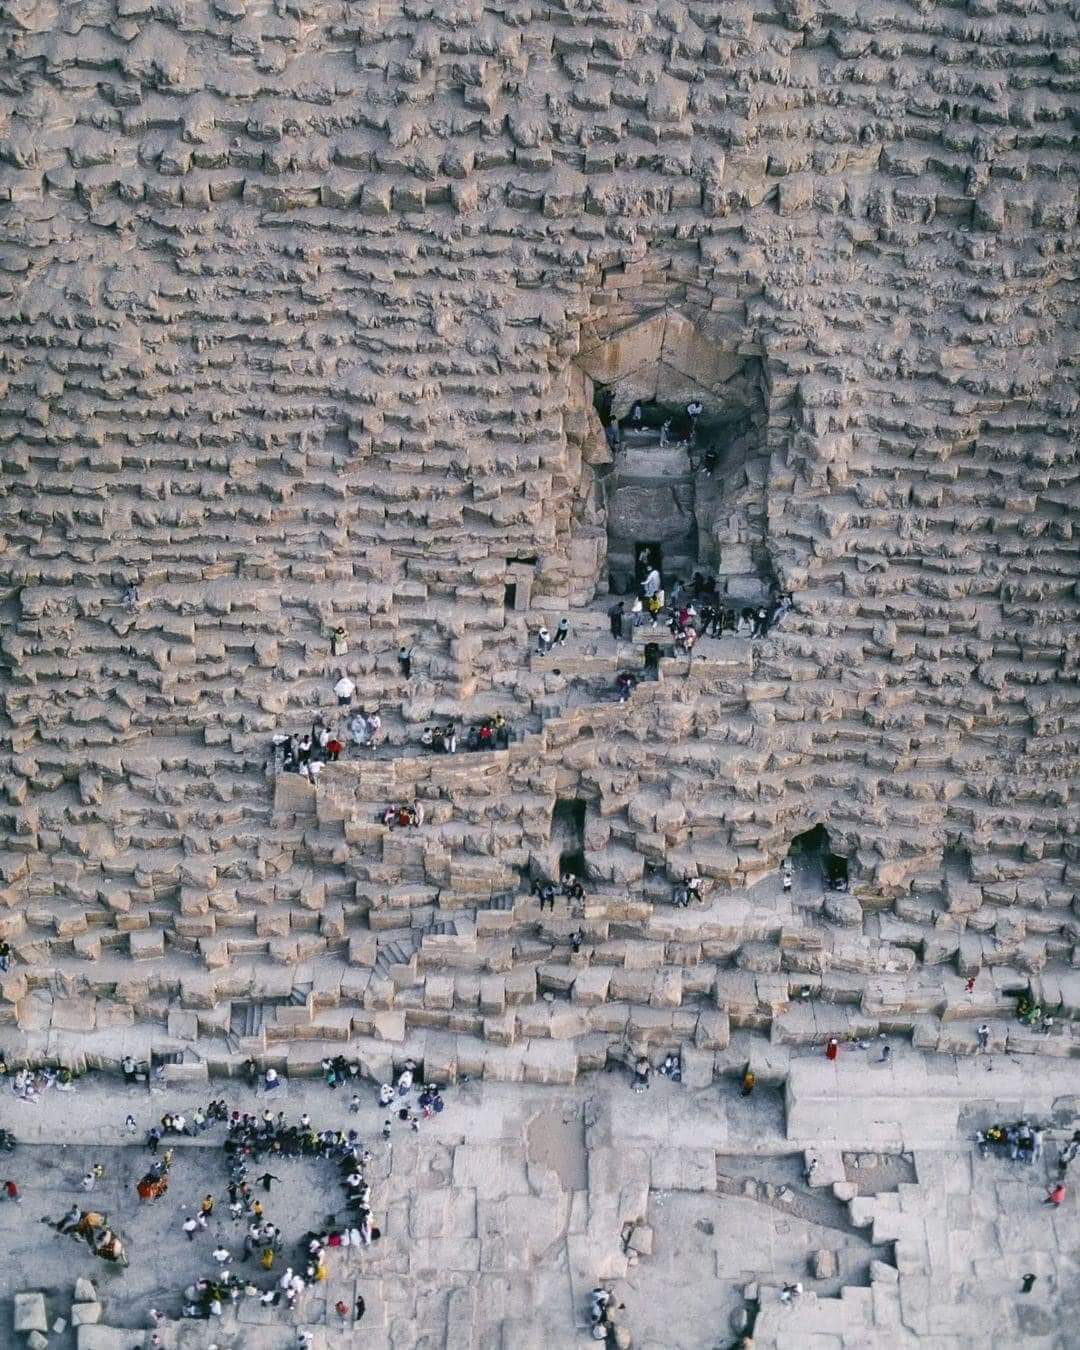 Photo Of The Day - The entrance to the great pyramid of Giza